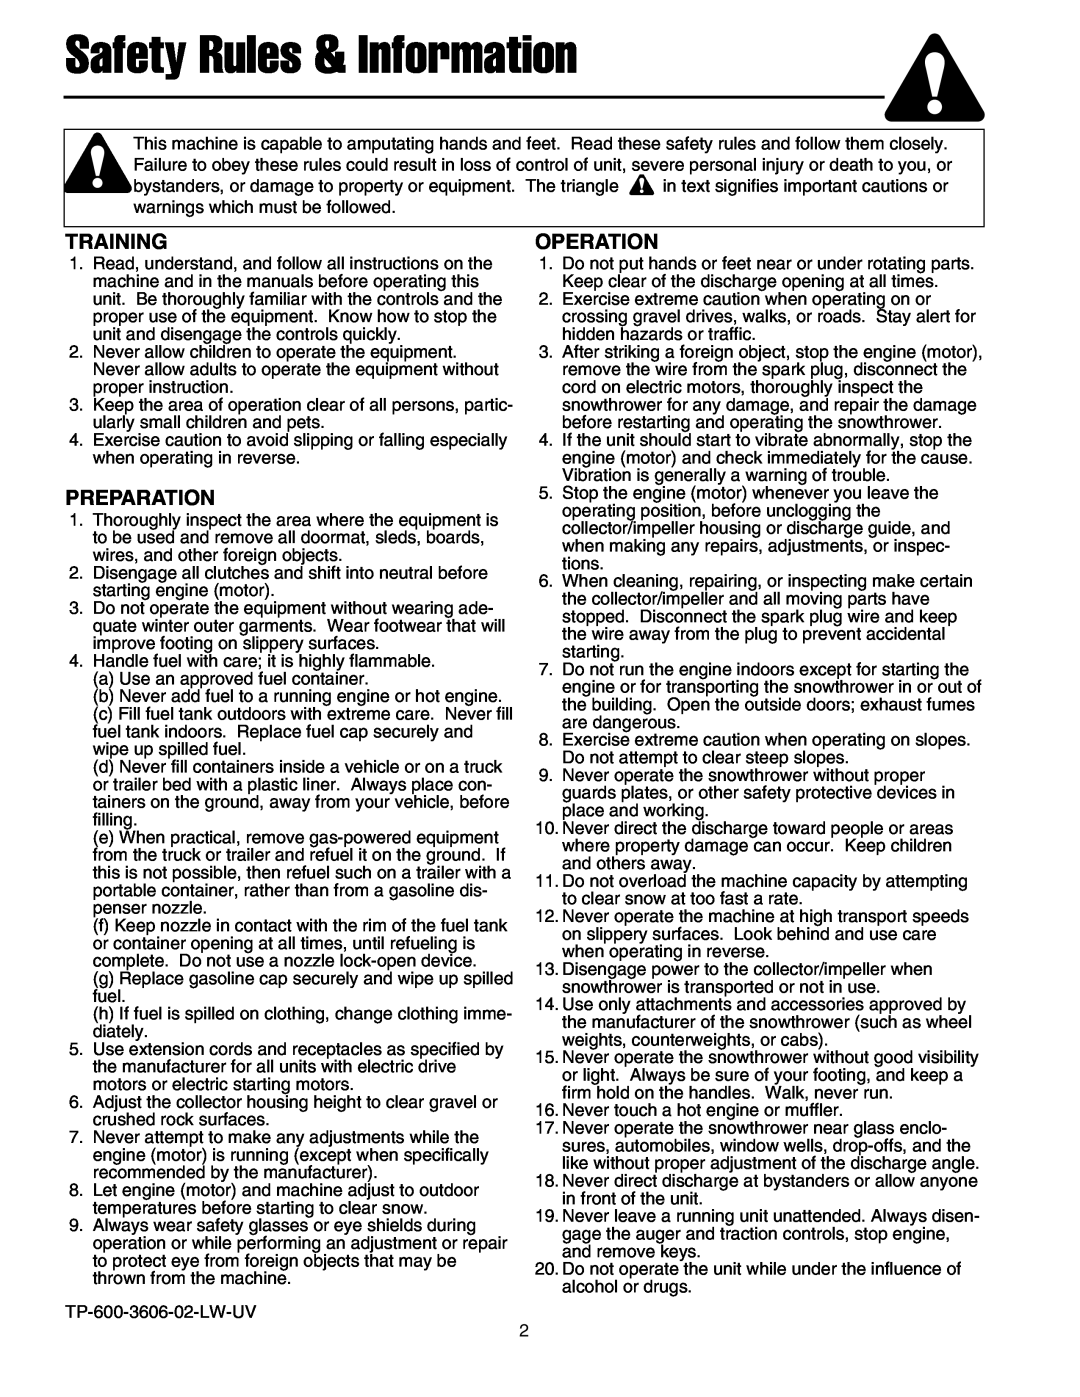 Snapper 520E manual Safety Rules & Information, Training, Preparation, Operation 